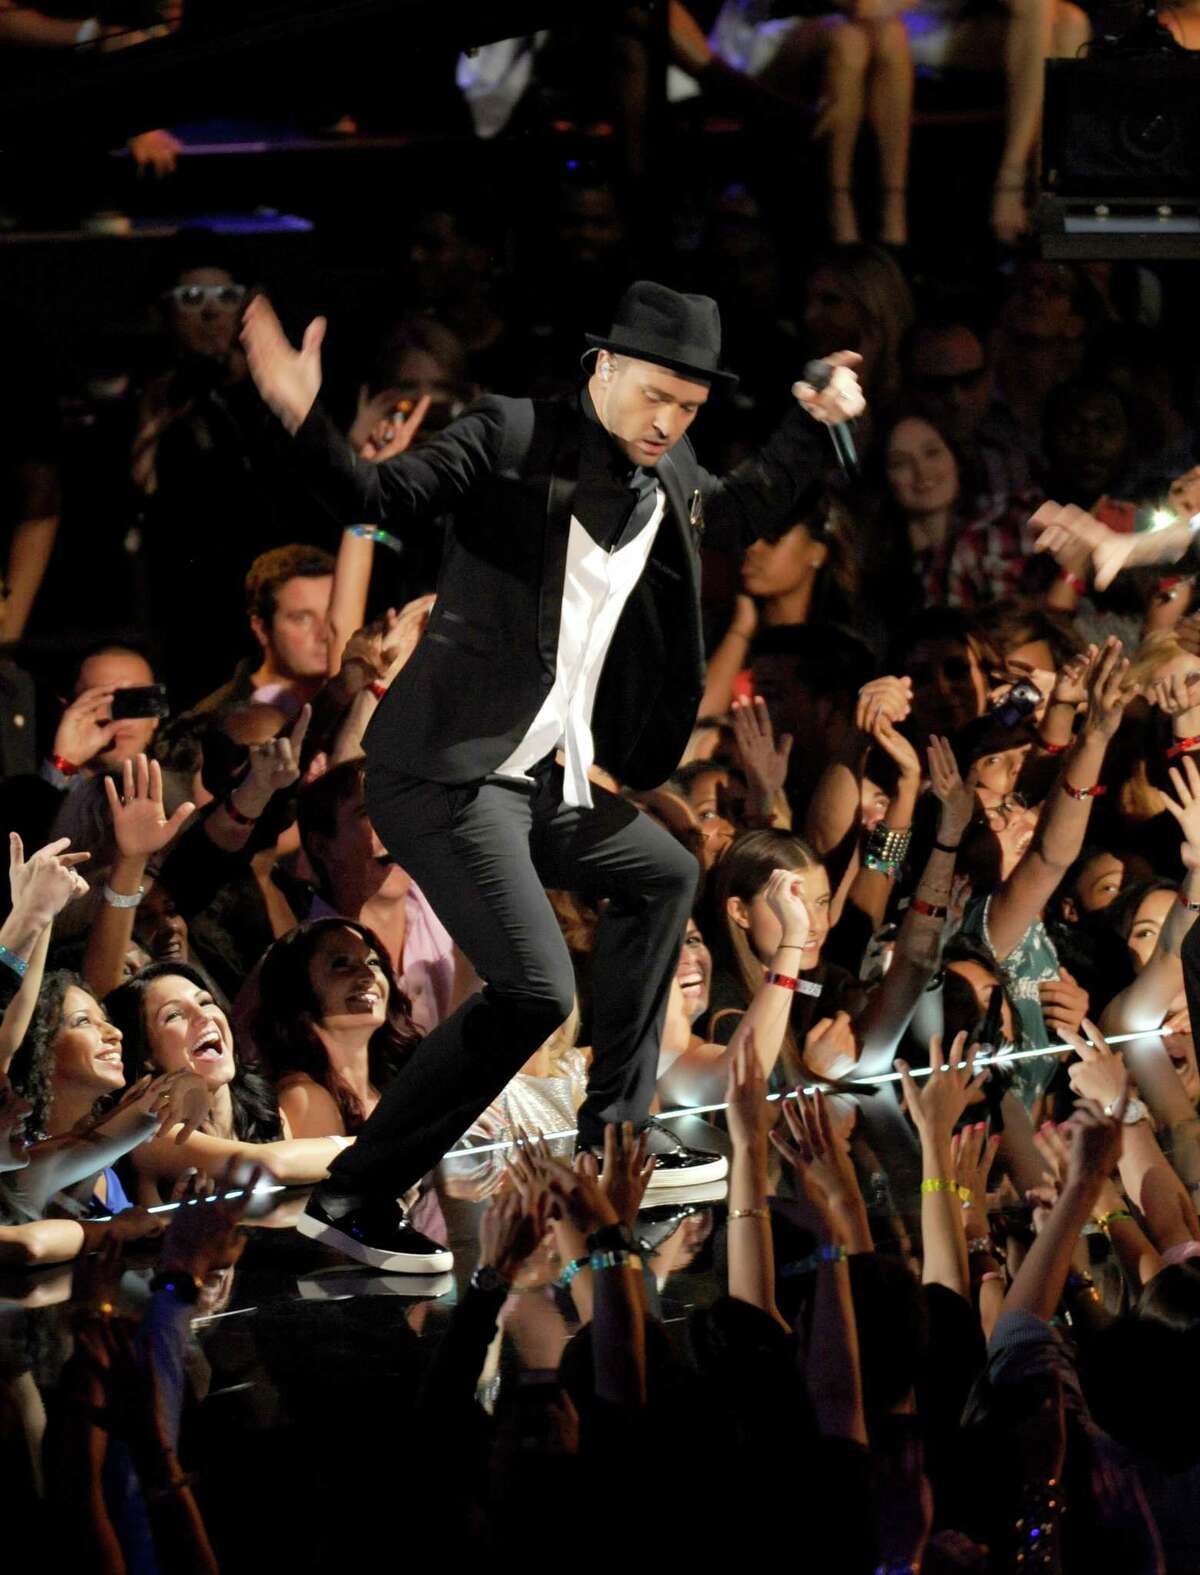 Justin Timberlake performs at the MTV Video Music Awards on Sunday, Aug. 25, 2013, at the Barclays Center in the Brooklyn borough of New York. (Photo by Scott Gries/Invision/AP)